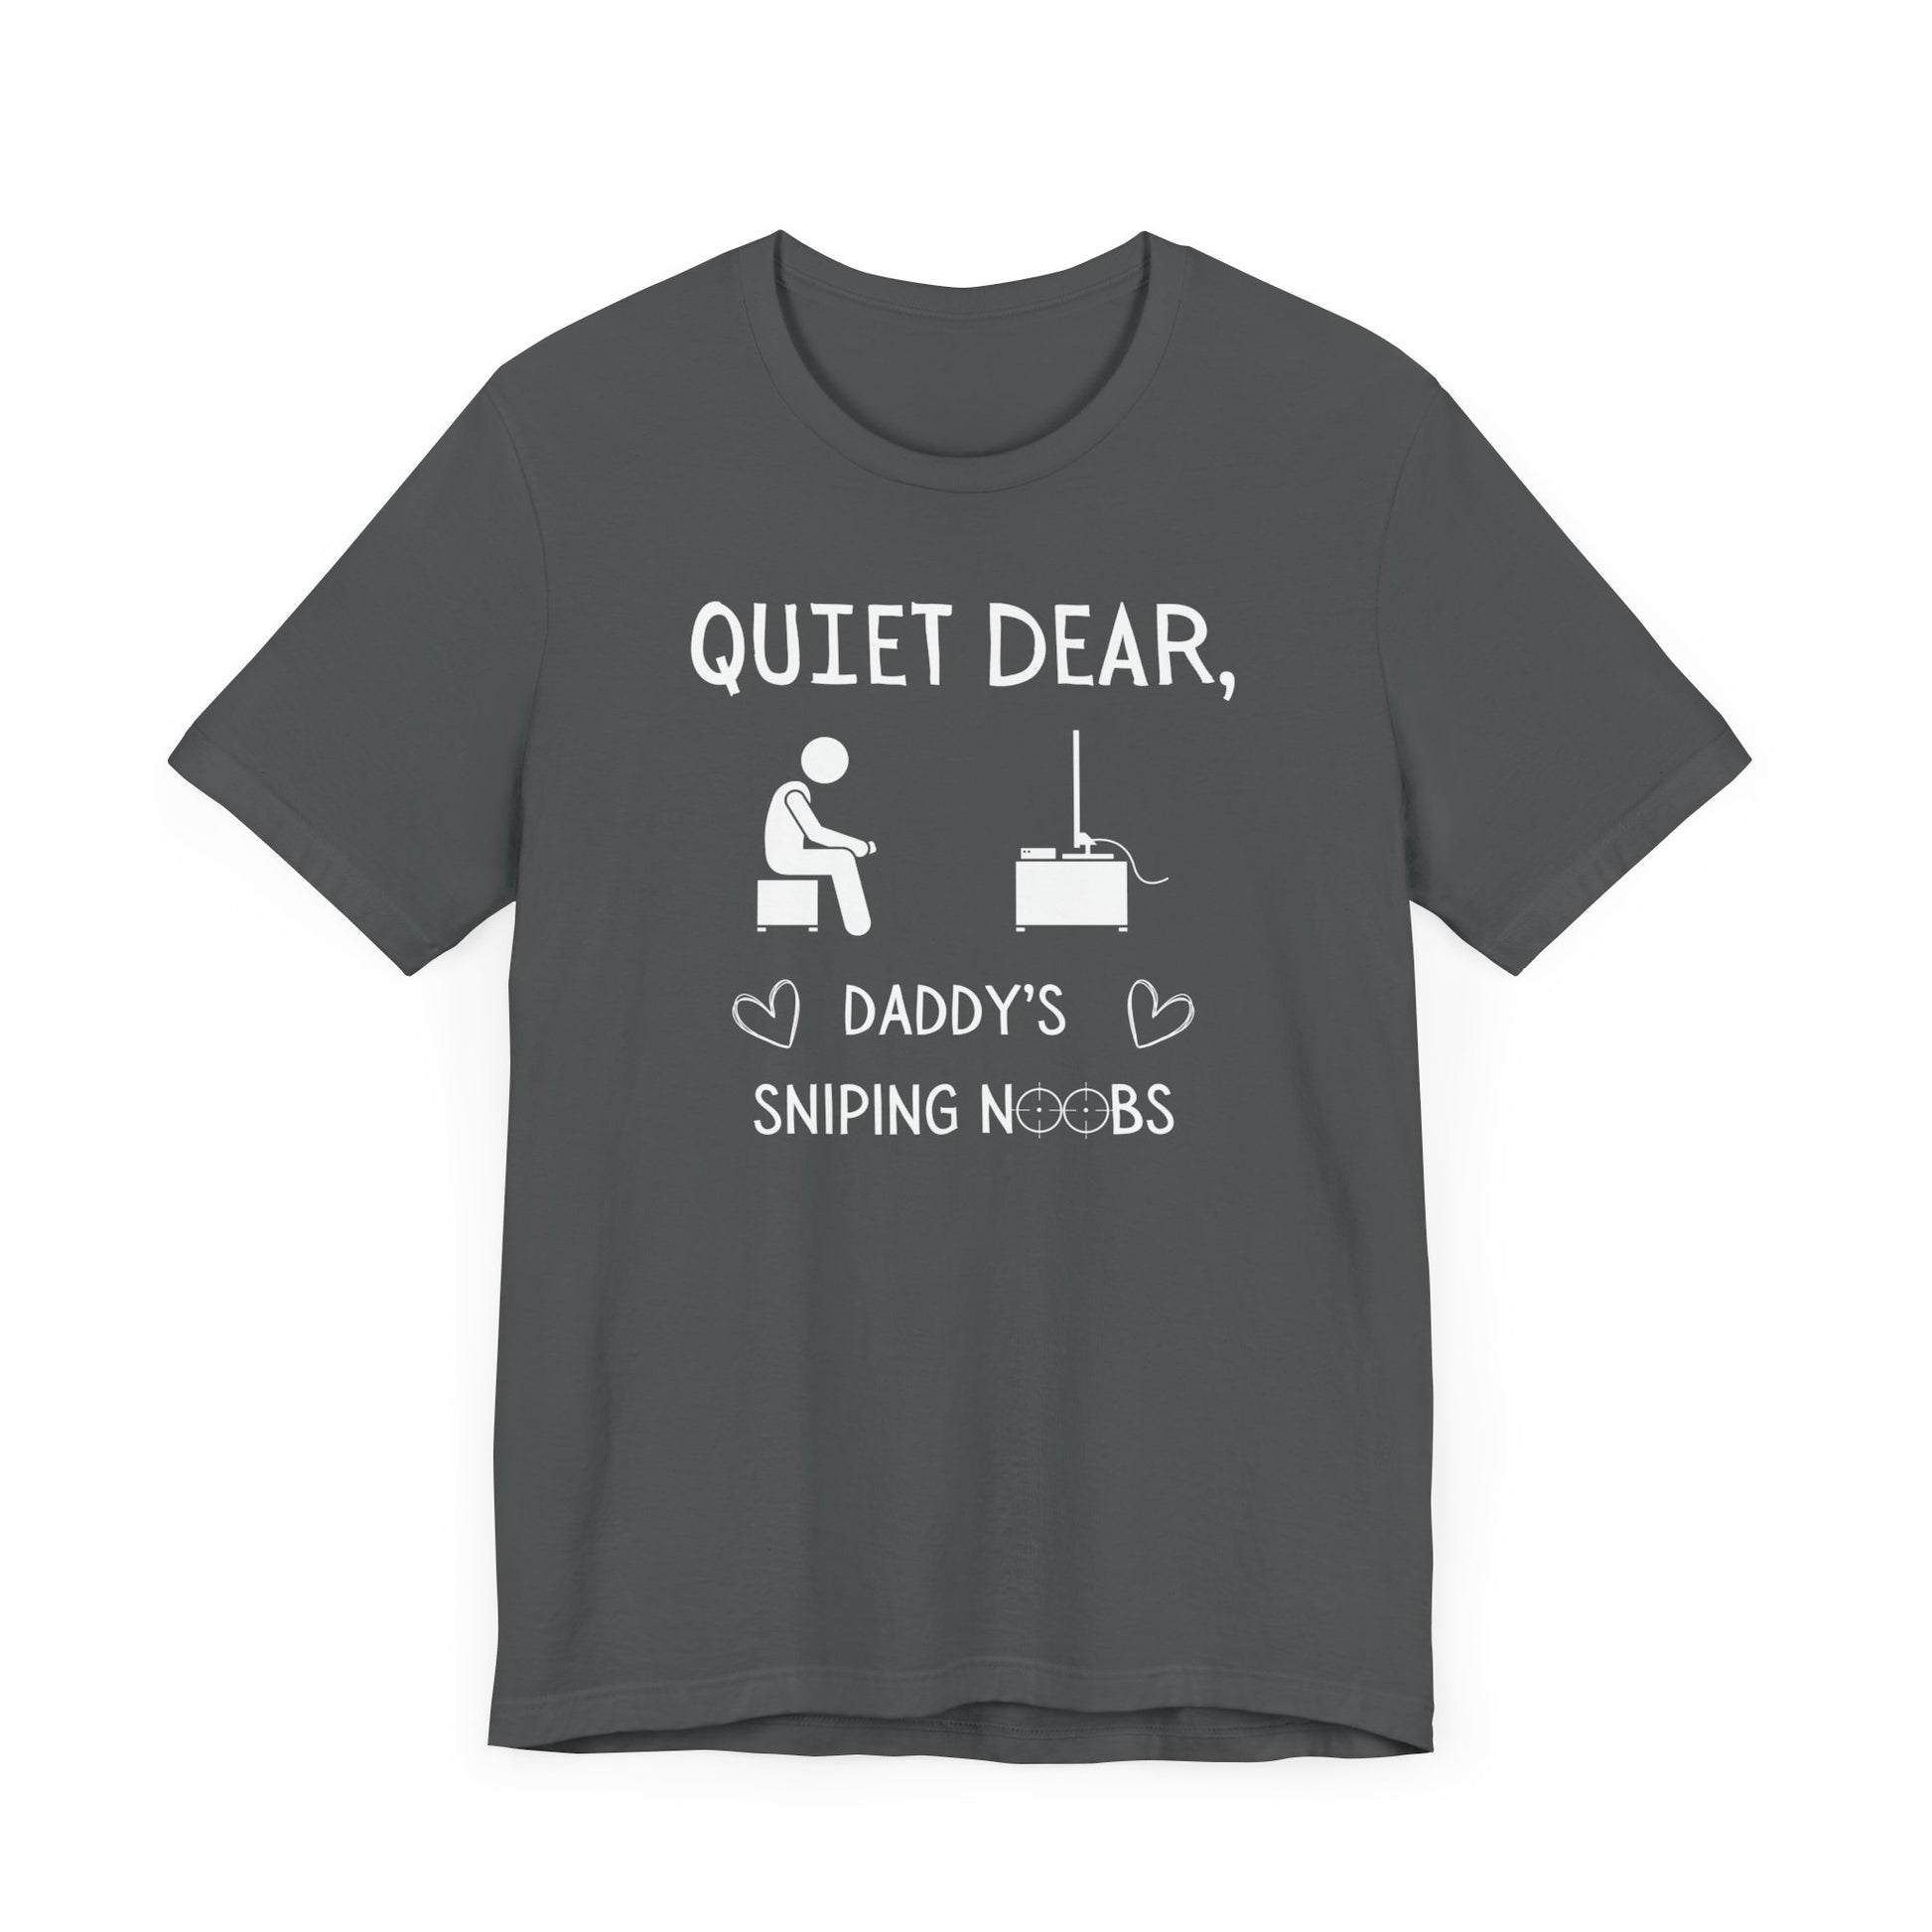 A flat image of a gray t-shirt that reads Quiet Dear, Daddy's Sniping Noobs in white text. The lower text is framed by two hearts, and the O's are in the shape of sniper scopes. In the center of the shirt is an image of a person holding a controller sitting across from a TV.